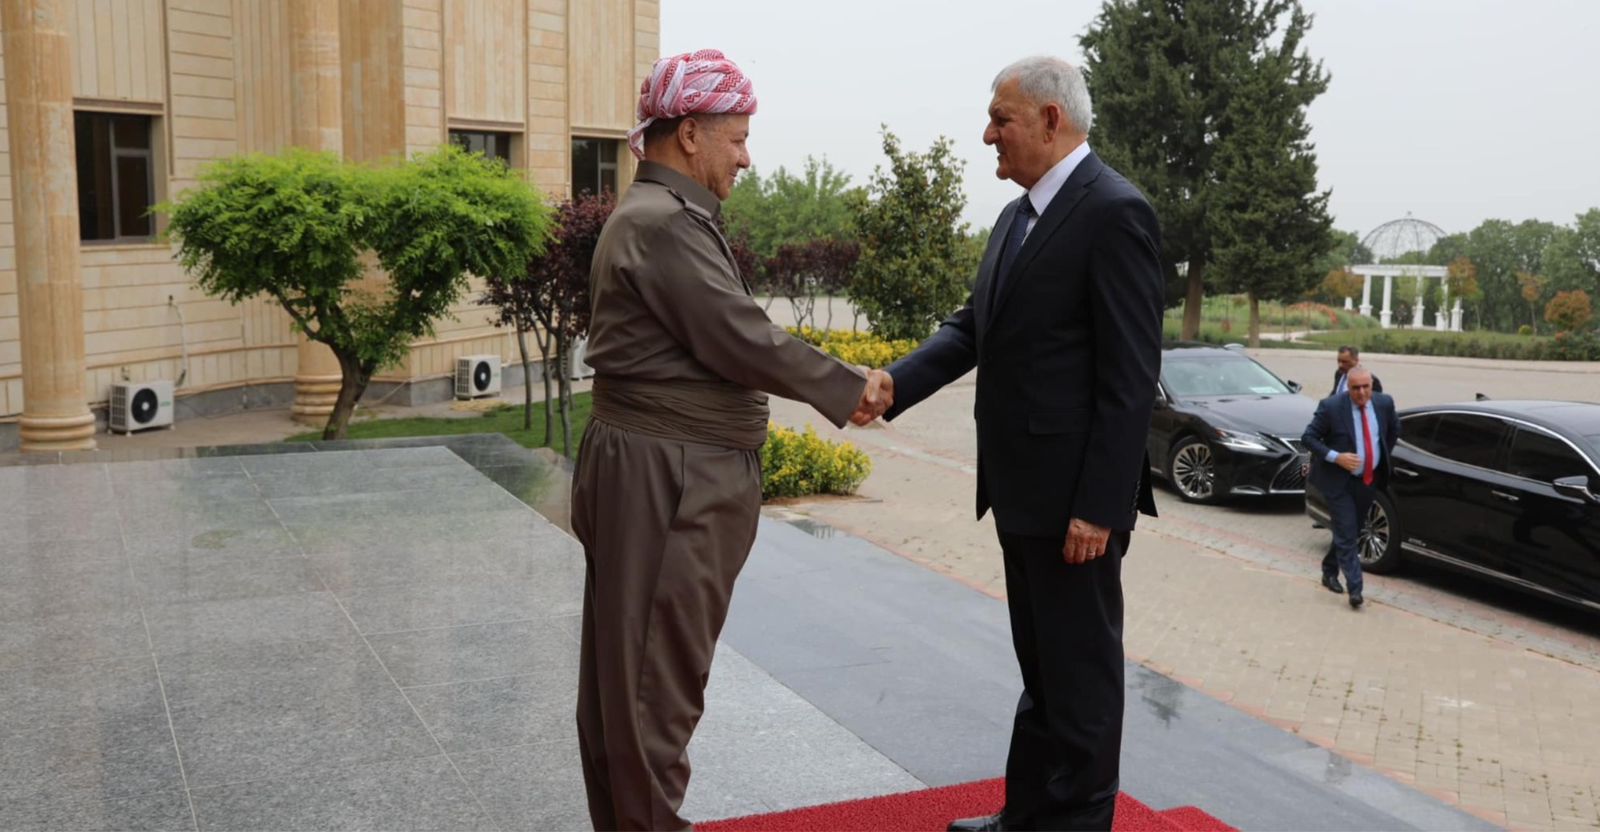 KRG President engages in talks with Iraqi President in Baghdad